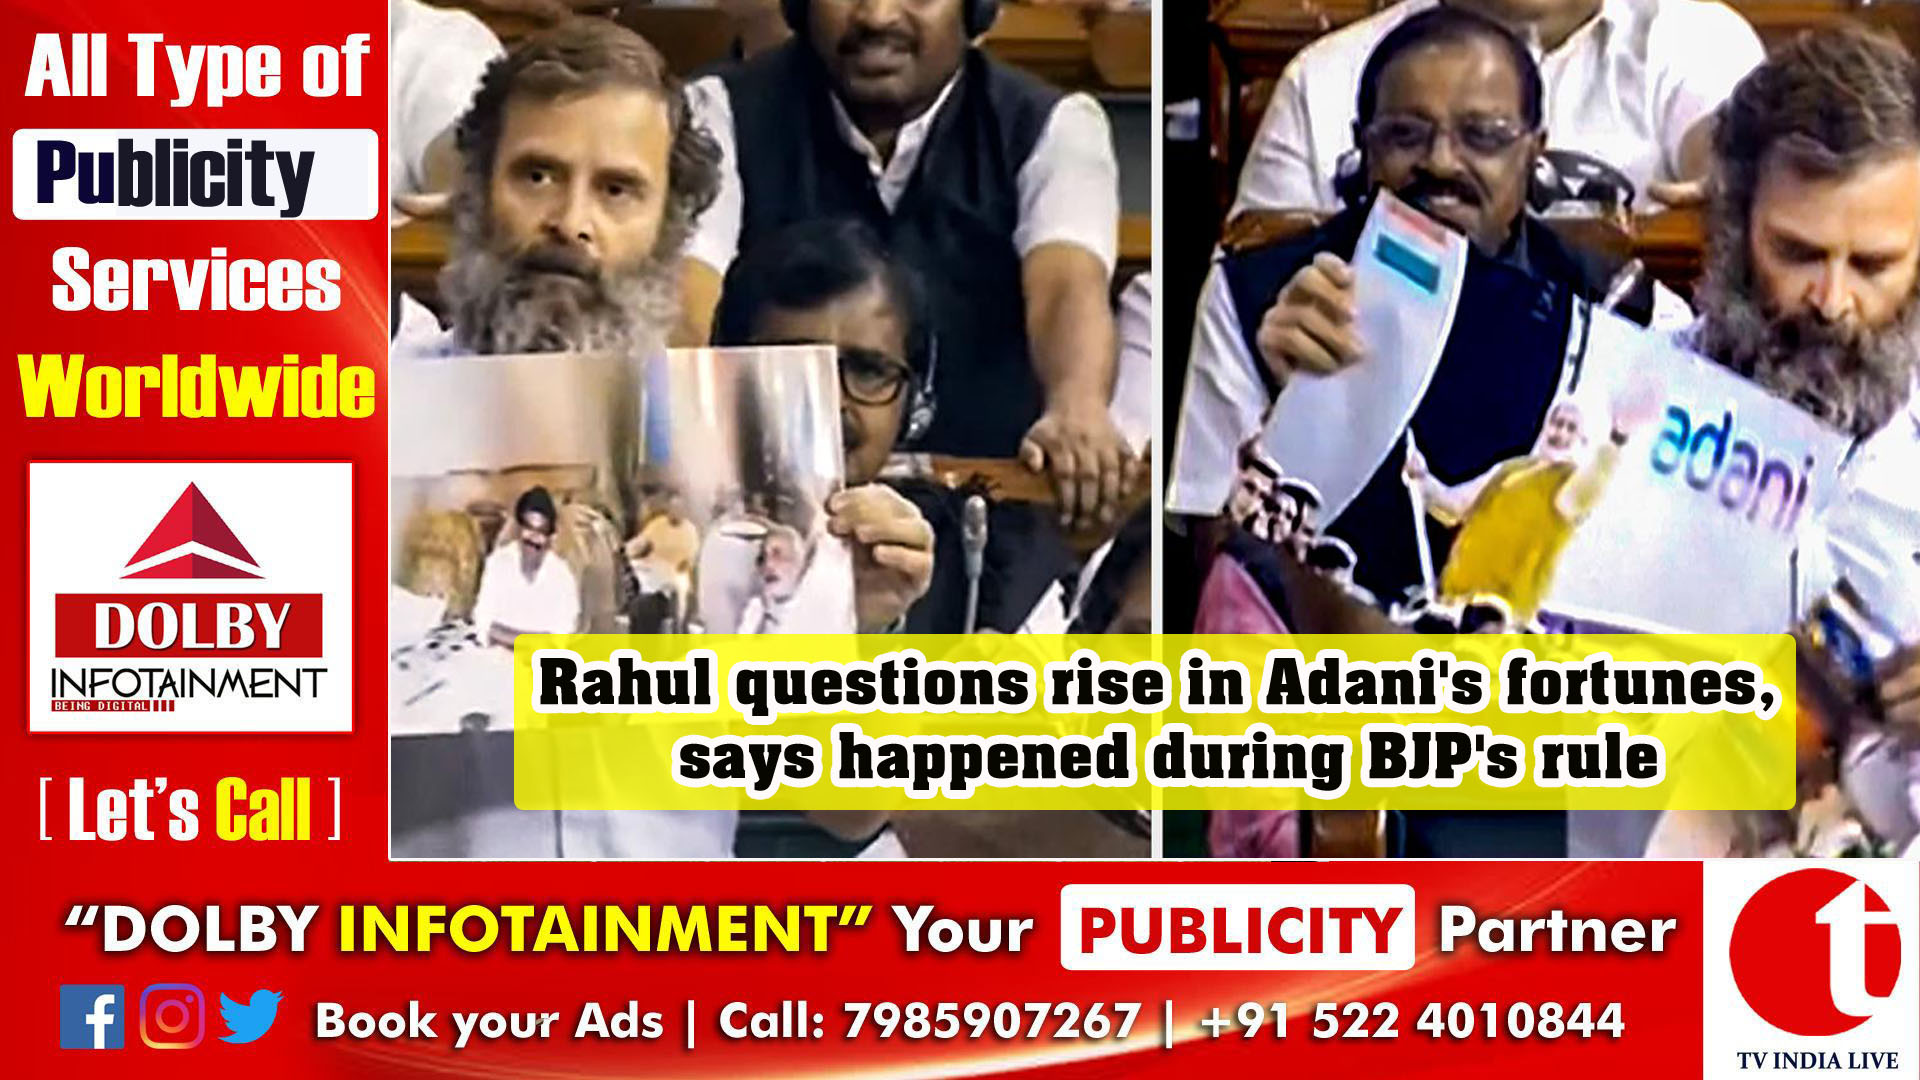 Rahul questions rise in Adani's fortunes, says happened during BJP's rule